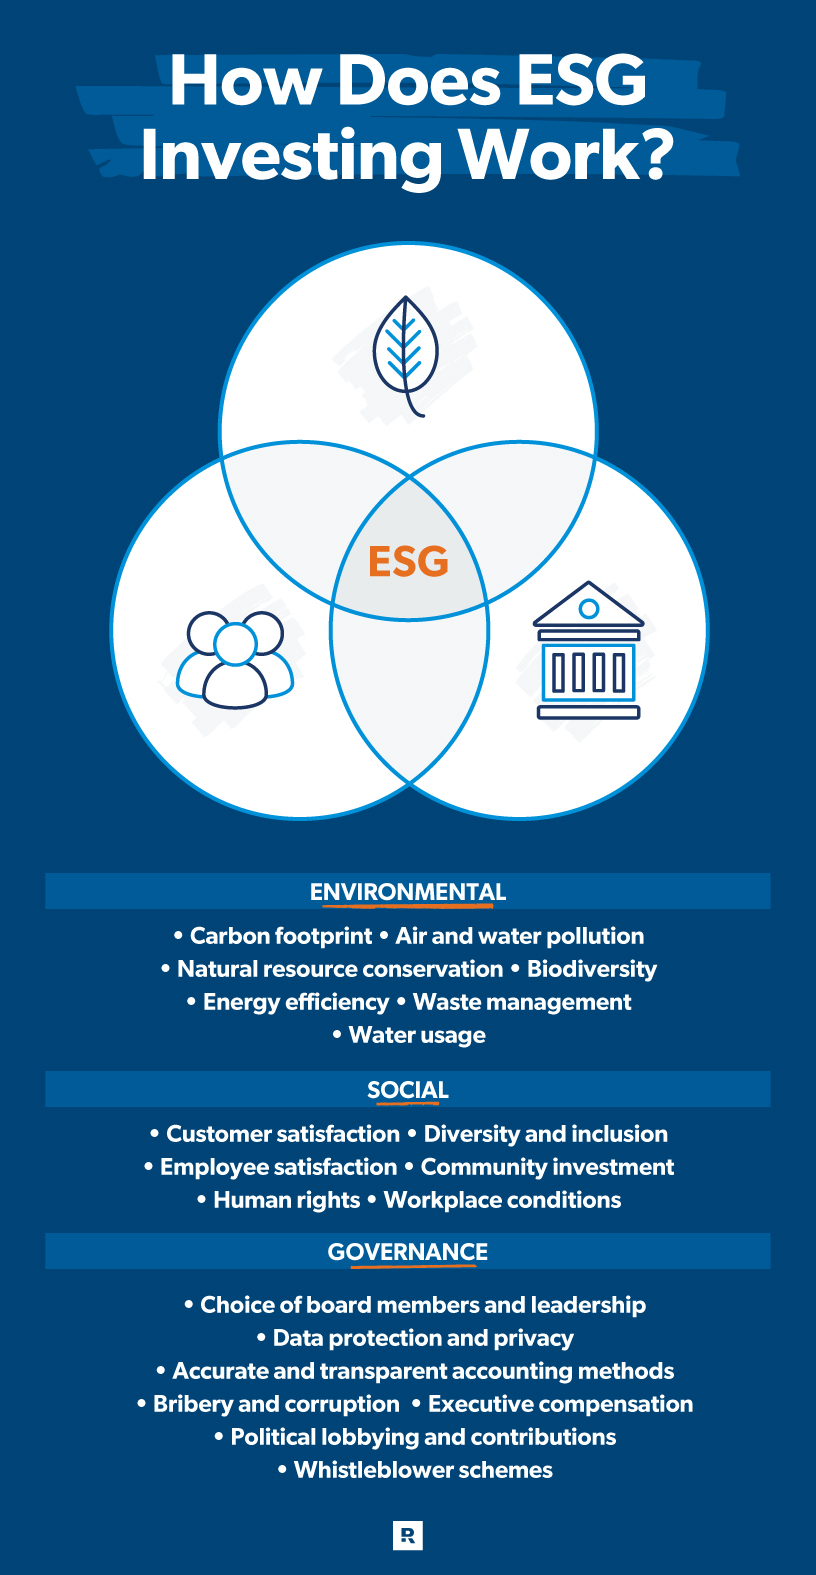 How Does ESG Investing Work?